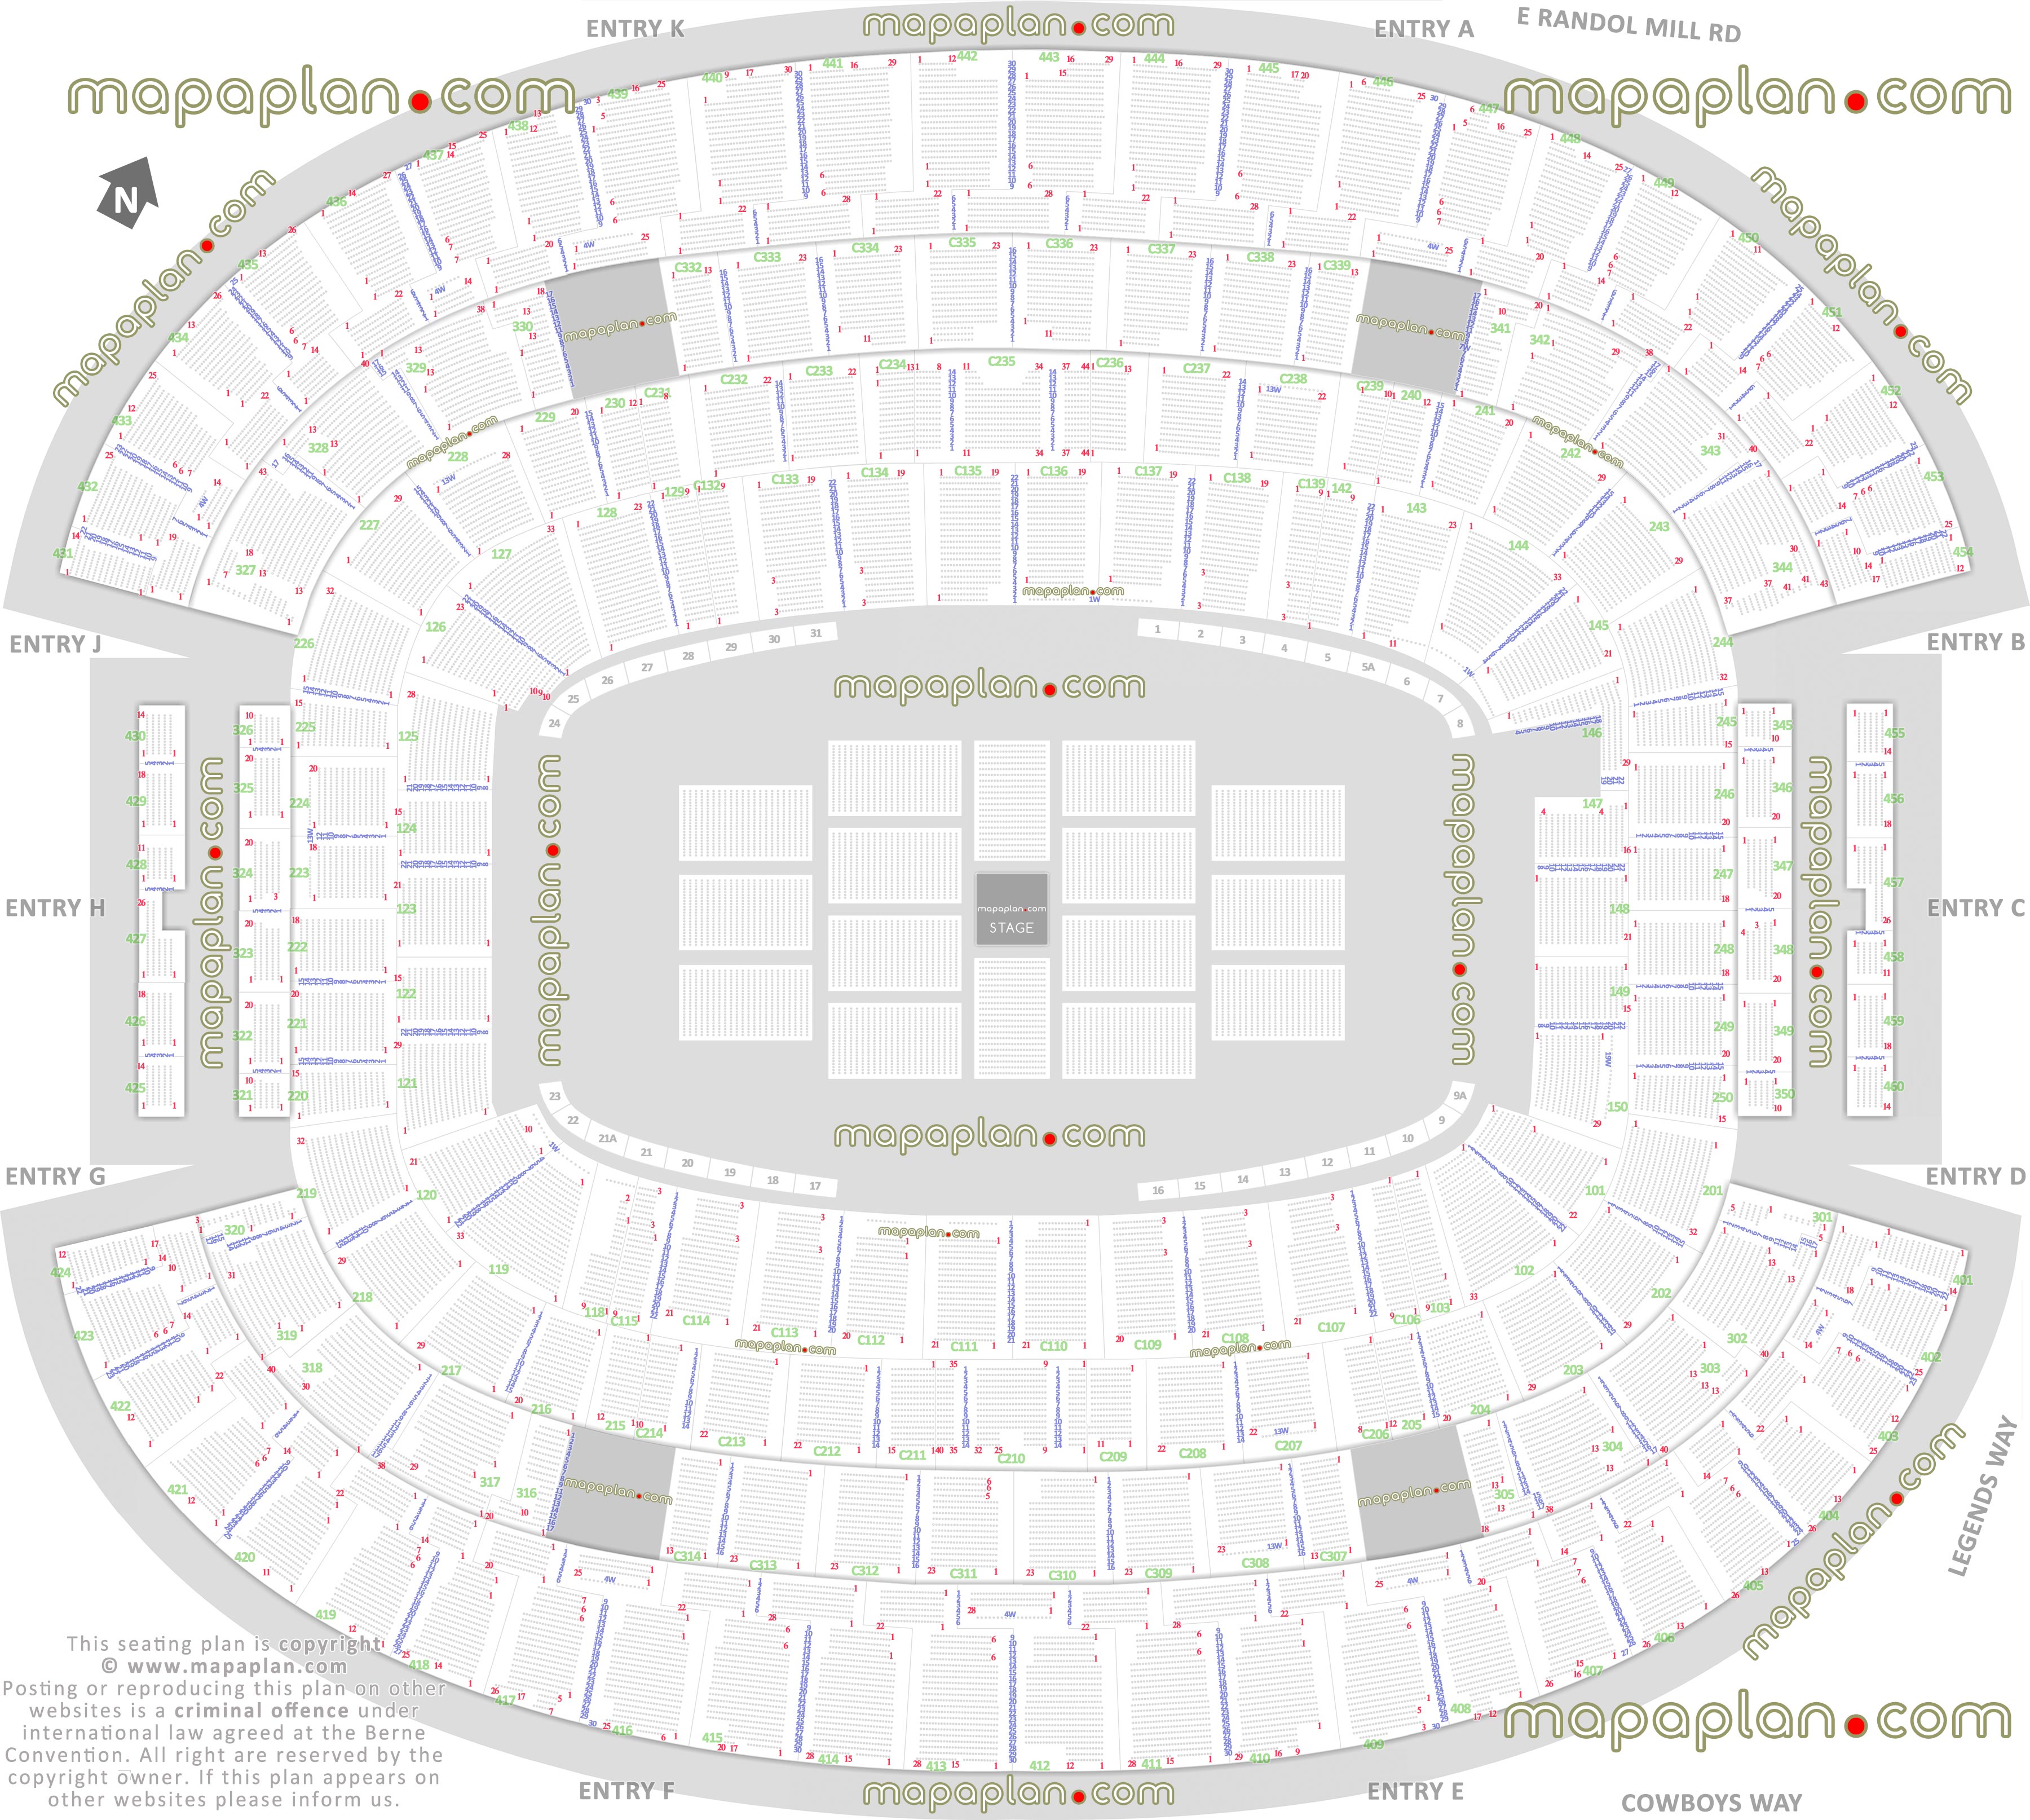 concert stage round printable virtual layout 360 degree arrangement interactive diagram seats row hall fame club level main mezzanine upper concourse balcony sections standing room only sro wheelchair disabled handicap accessible seats plan premium executive loge boxes luxury party suites sections 101 102 103 119 120 124 126 127 144 202 203 205 218 219 224 227 241 242 243 302 303 317 318 Dallas Cowboys AT&T Stadium seating chart